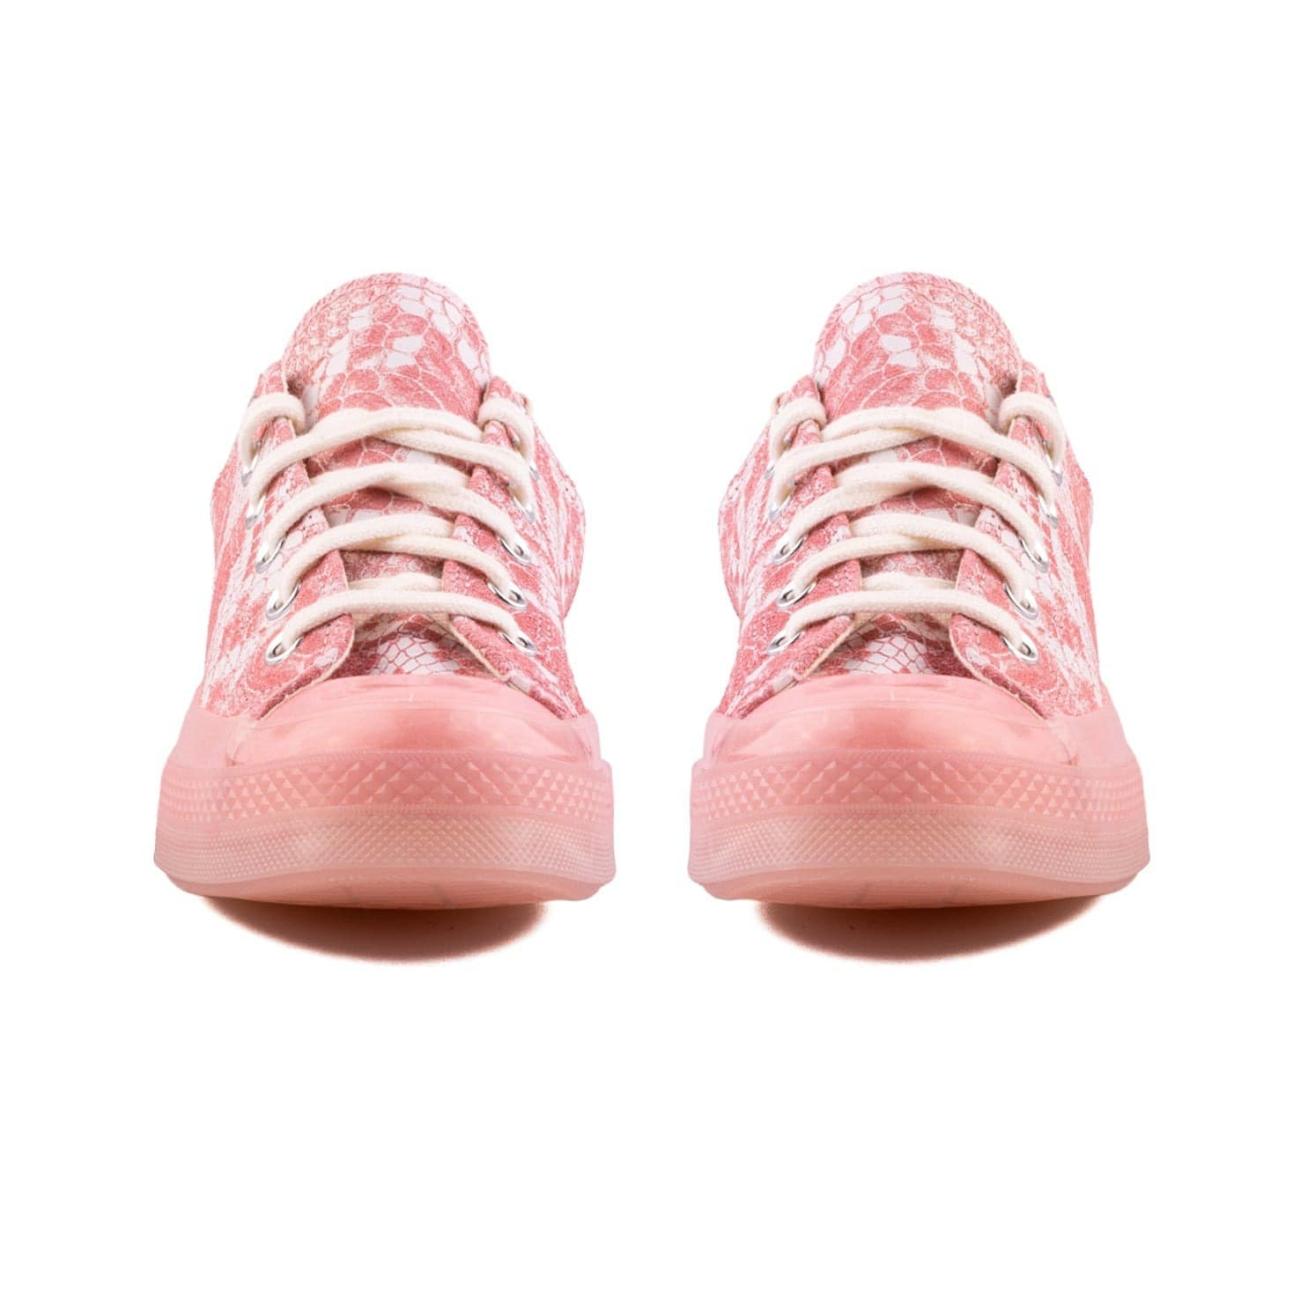 additional production CHUCK 70 OX pink